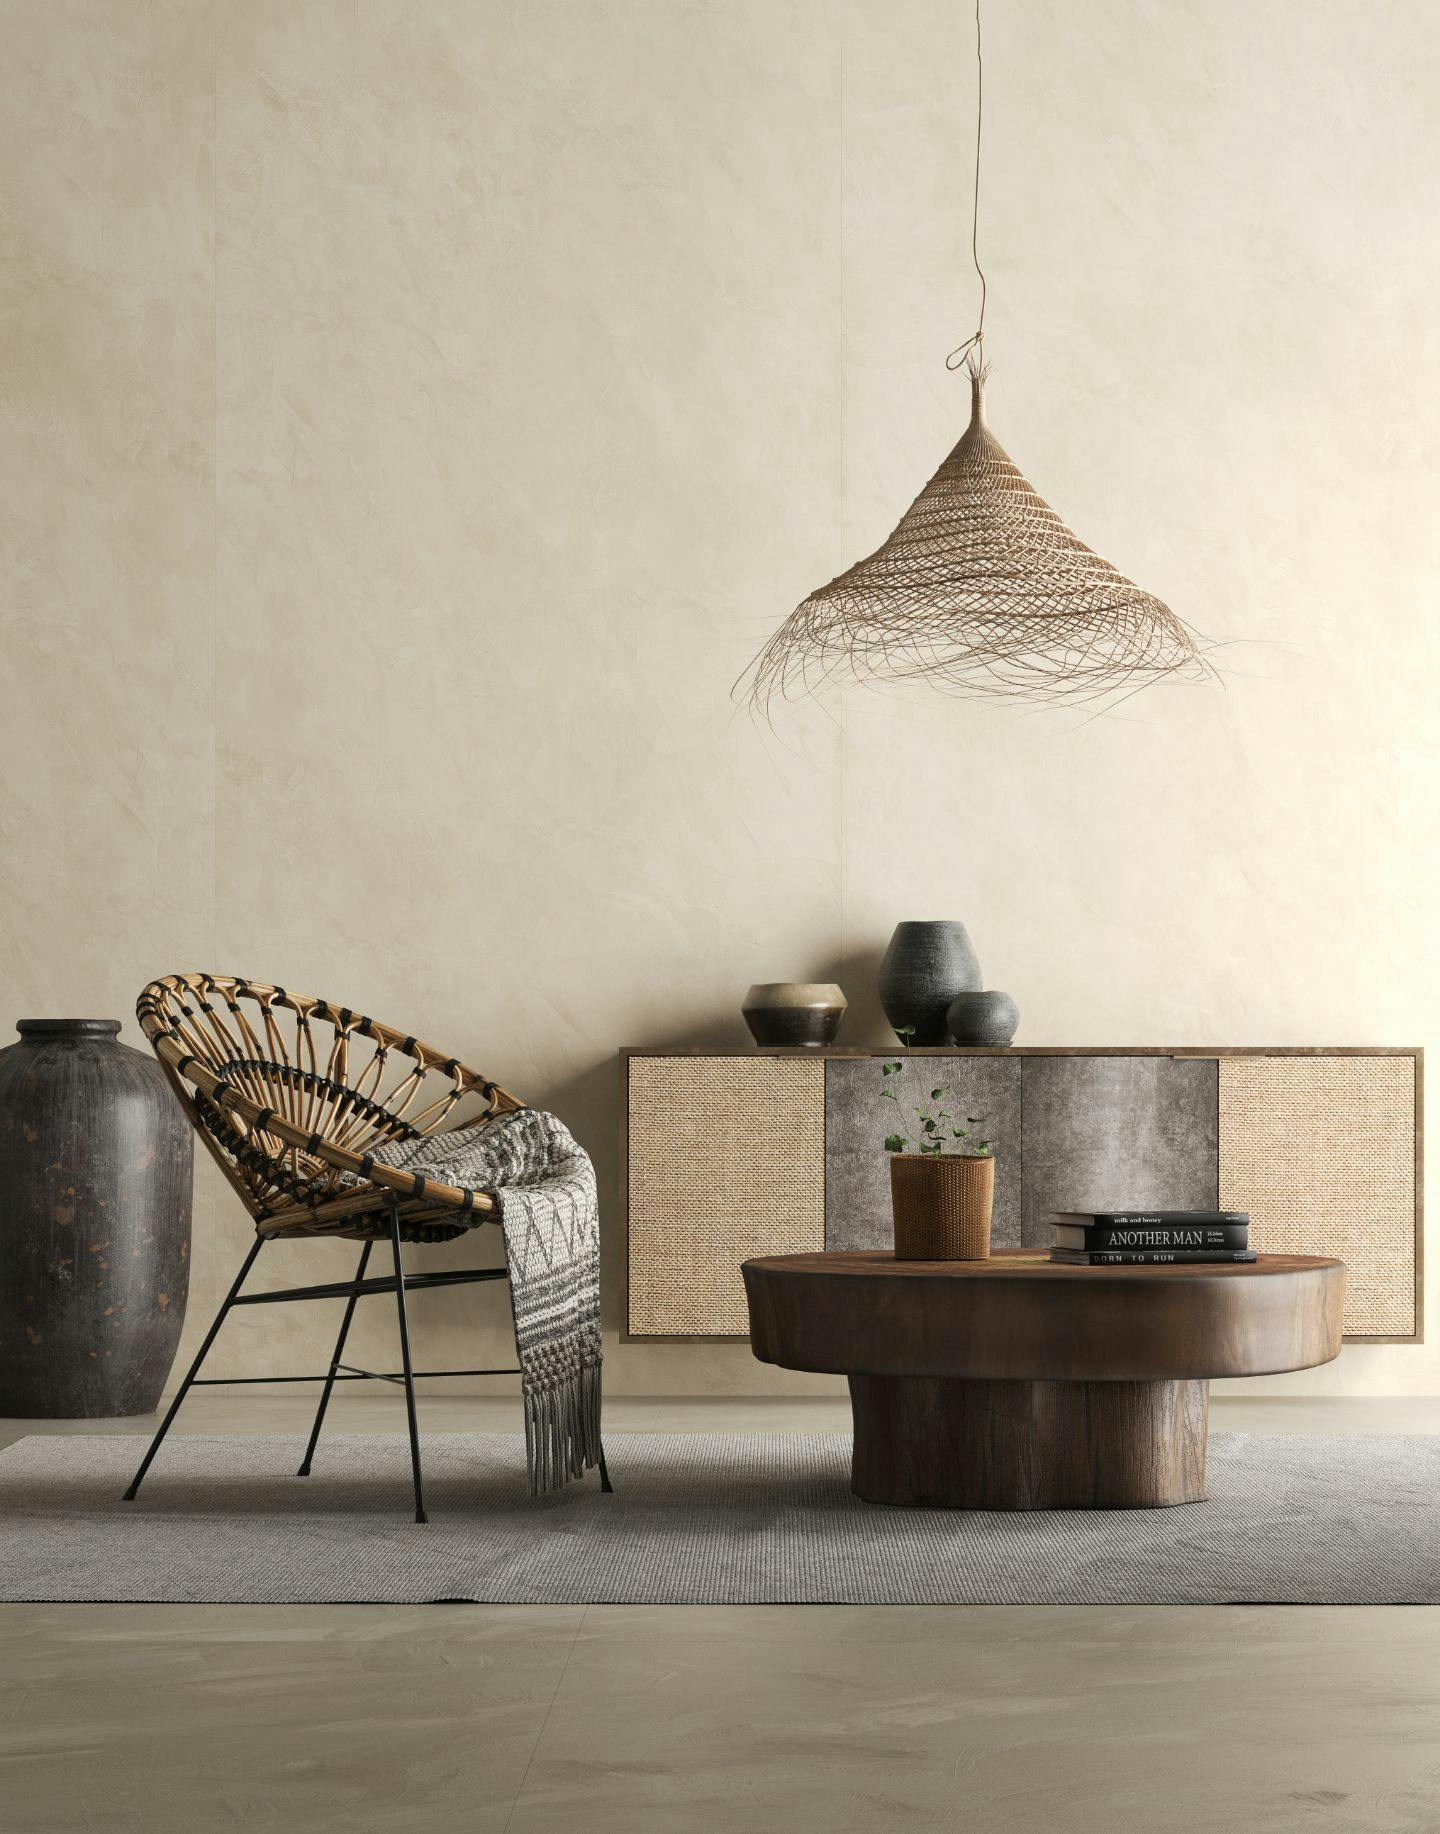 Image number 78 of the current section of Inspiration of Cosentino USA